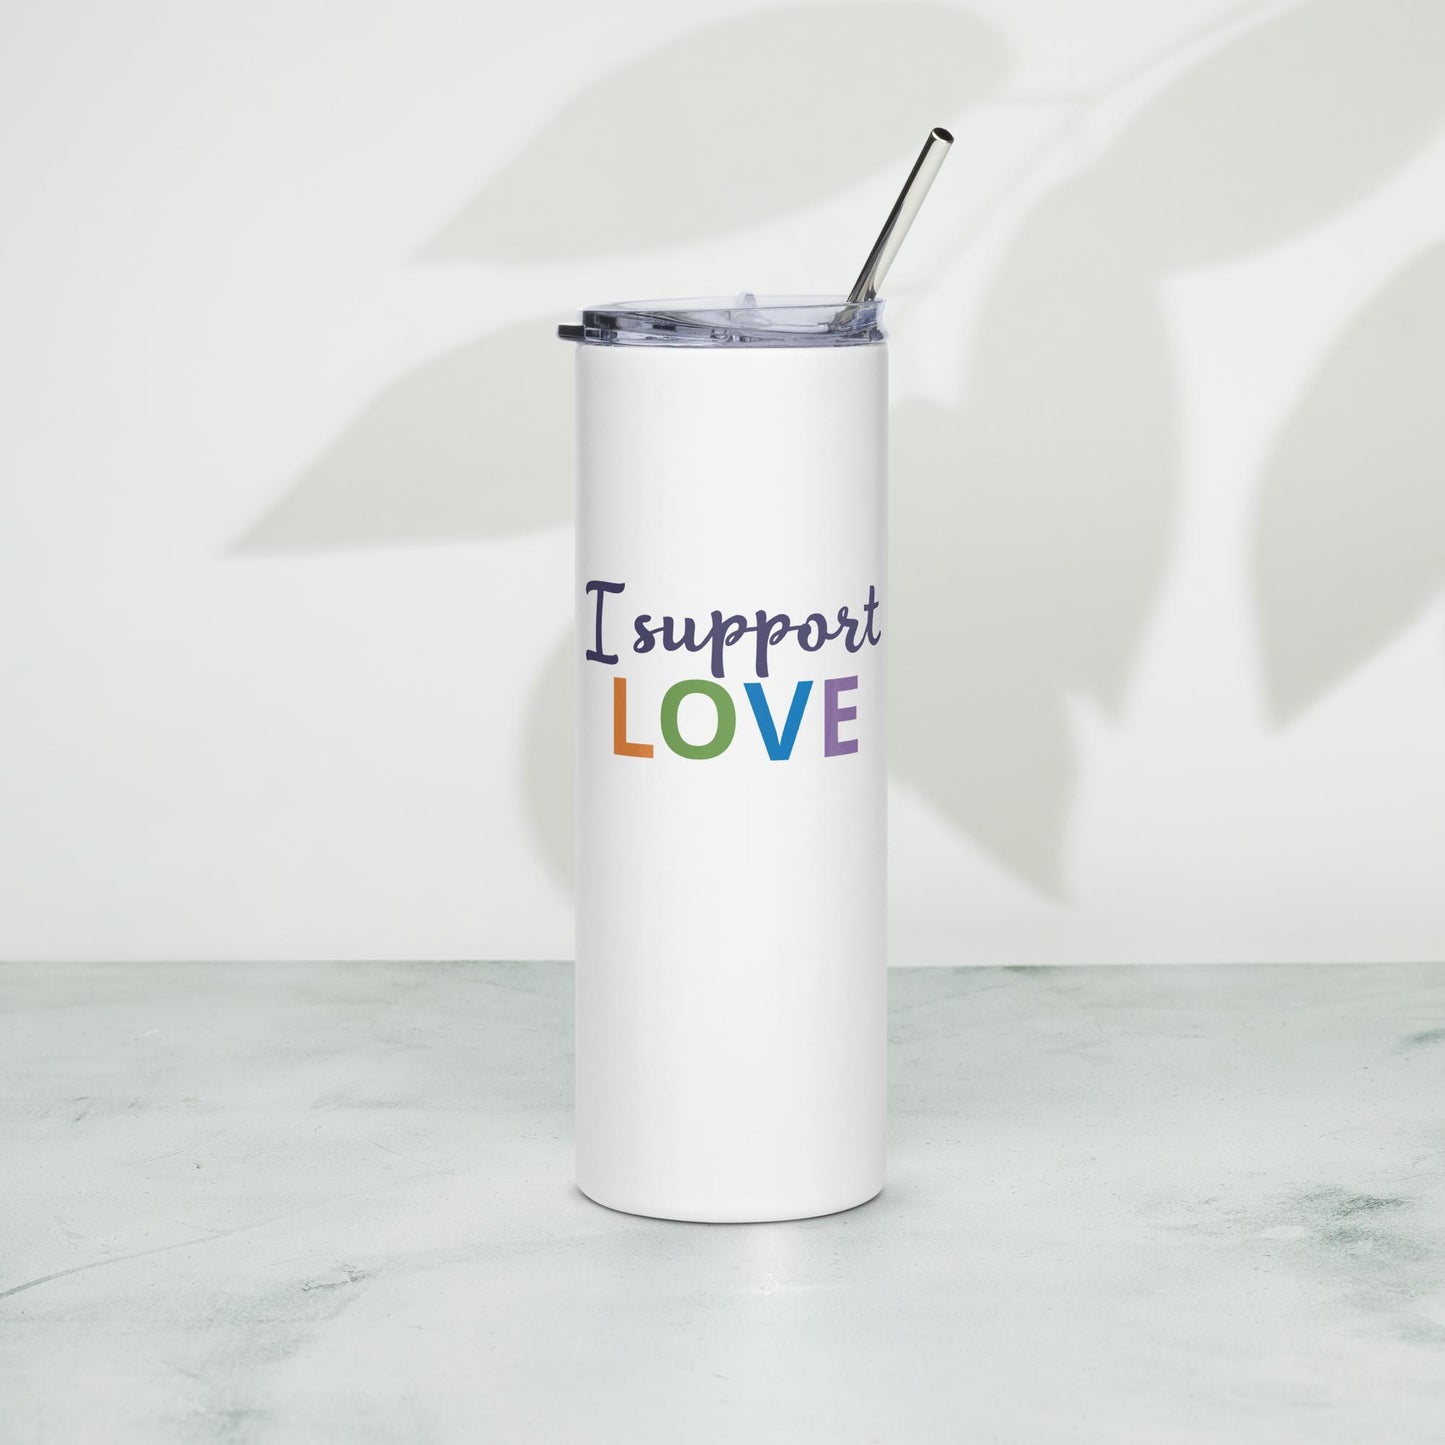 I Support Love - Stainless steel tumbler